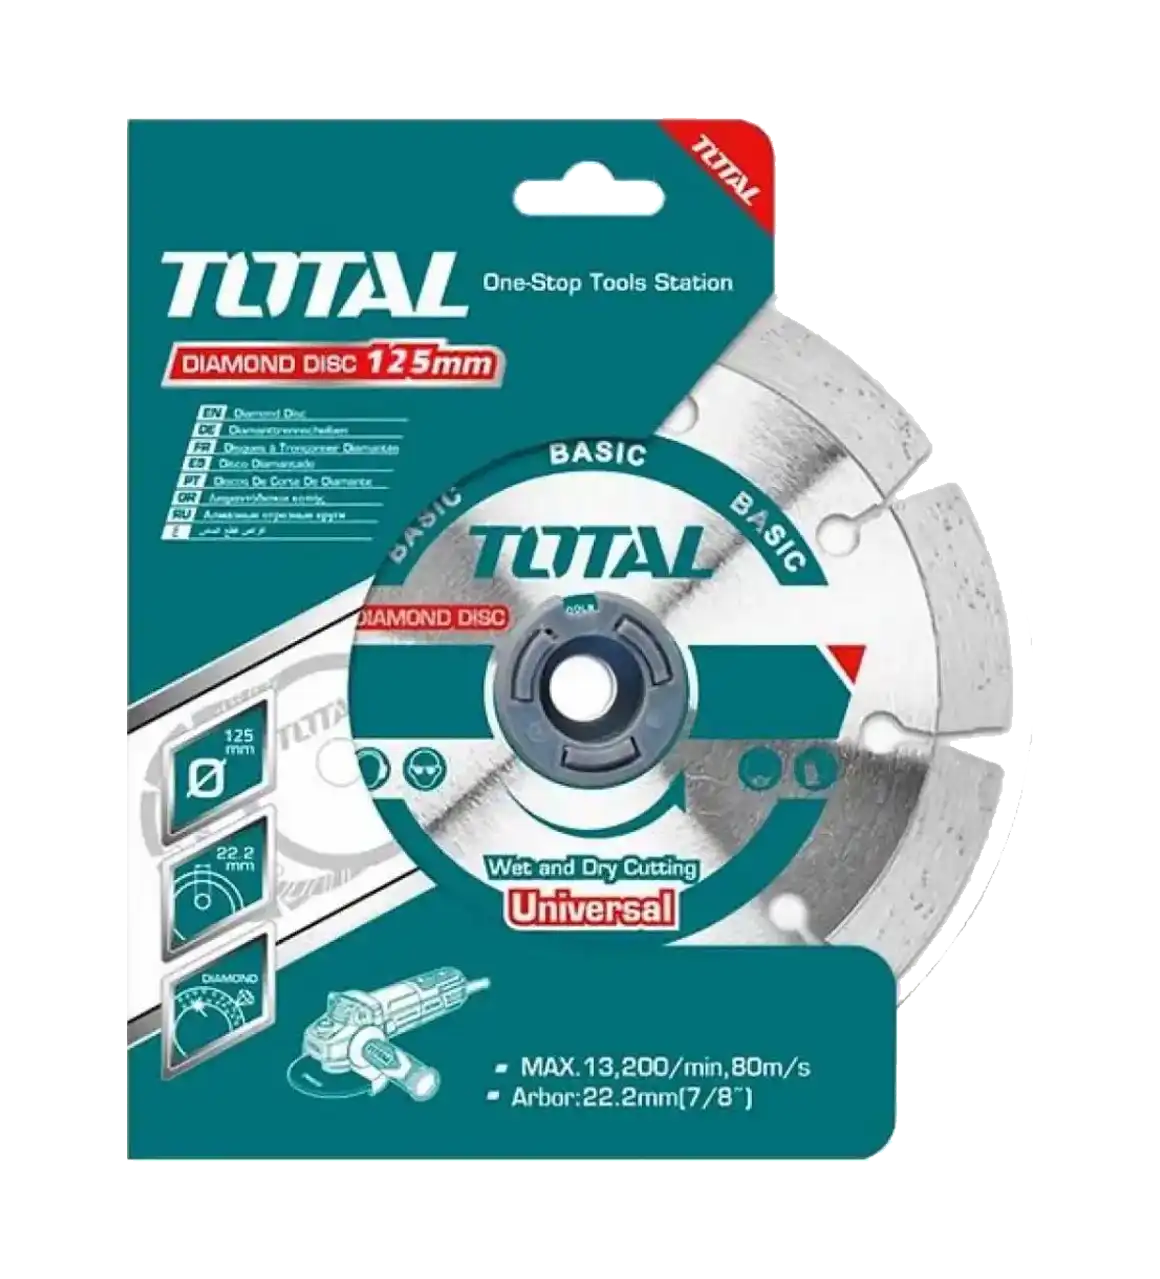 Total Concrete Cutting Cylinder, 125mm, TAC2111251